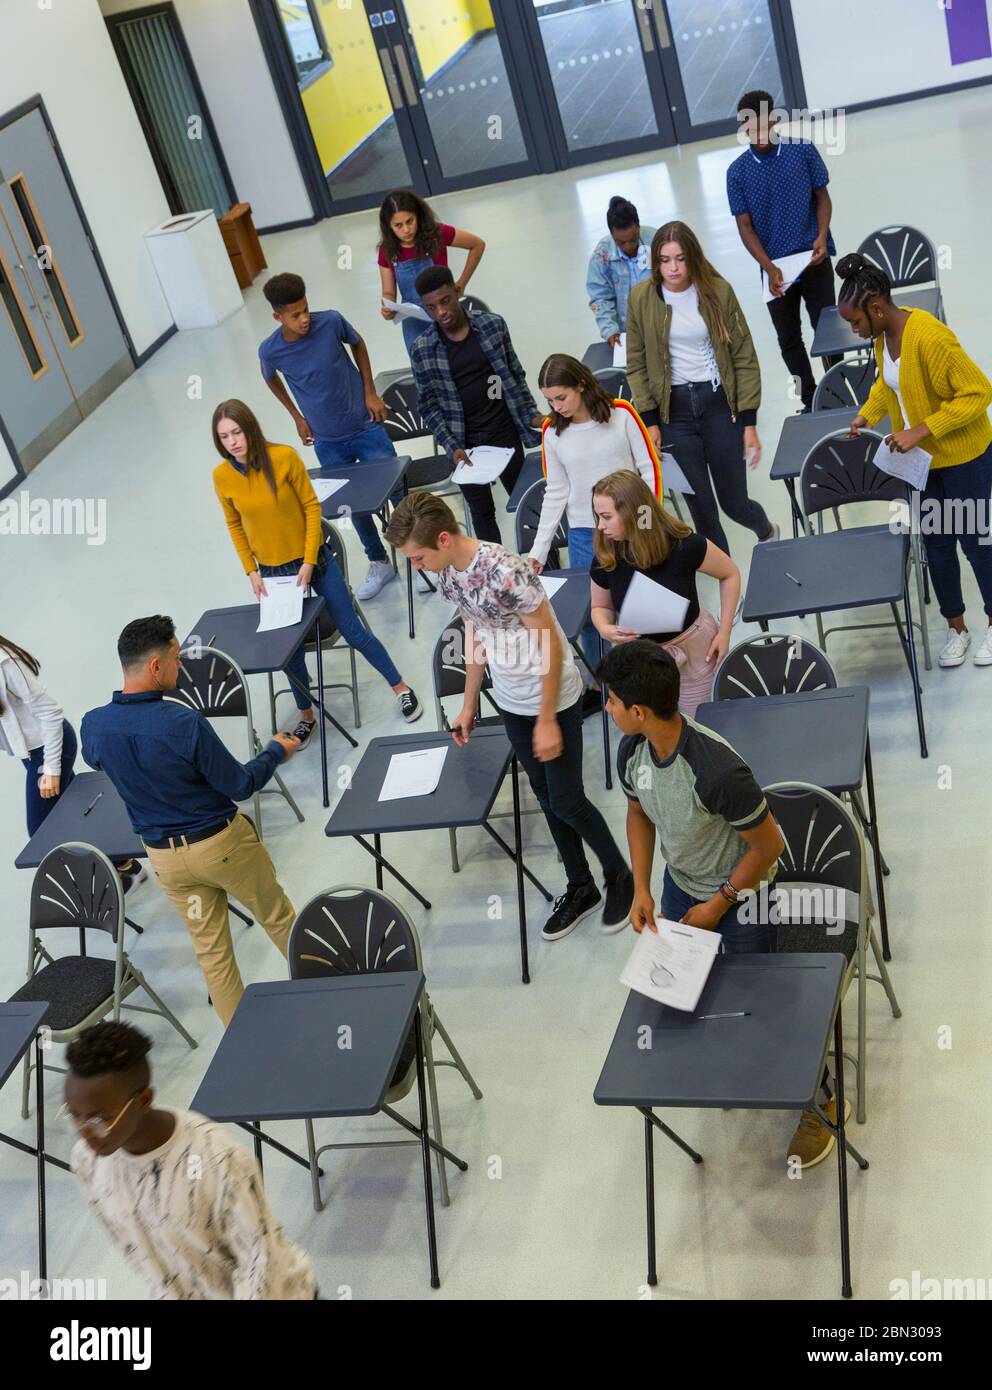 View from above high school students finishing exam at desks Stock Photo